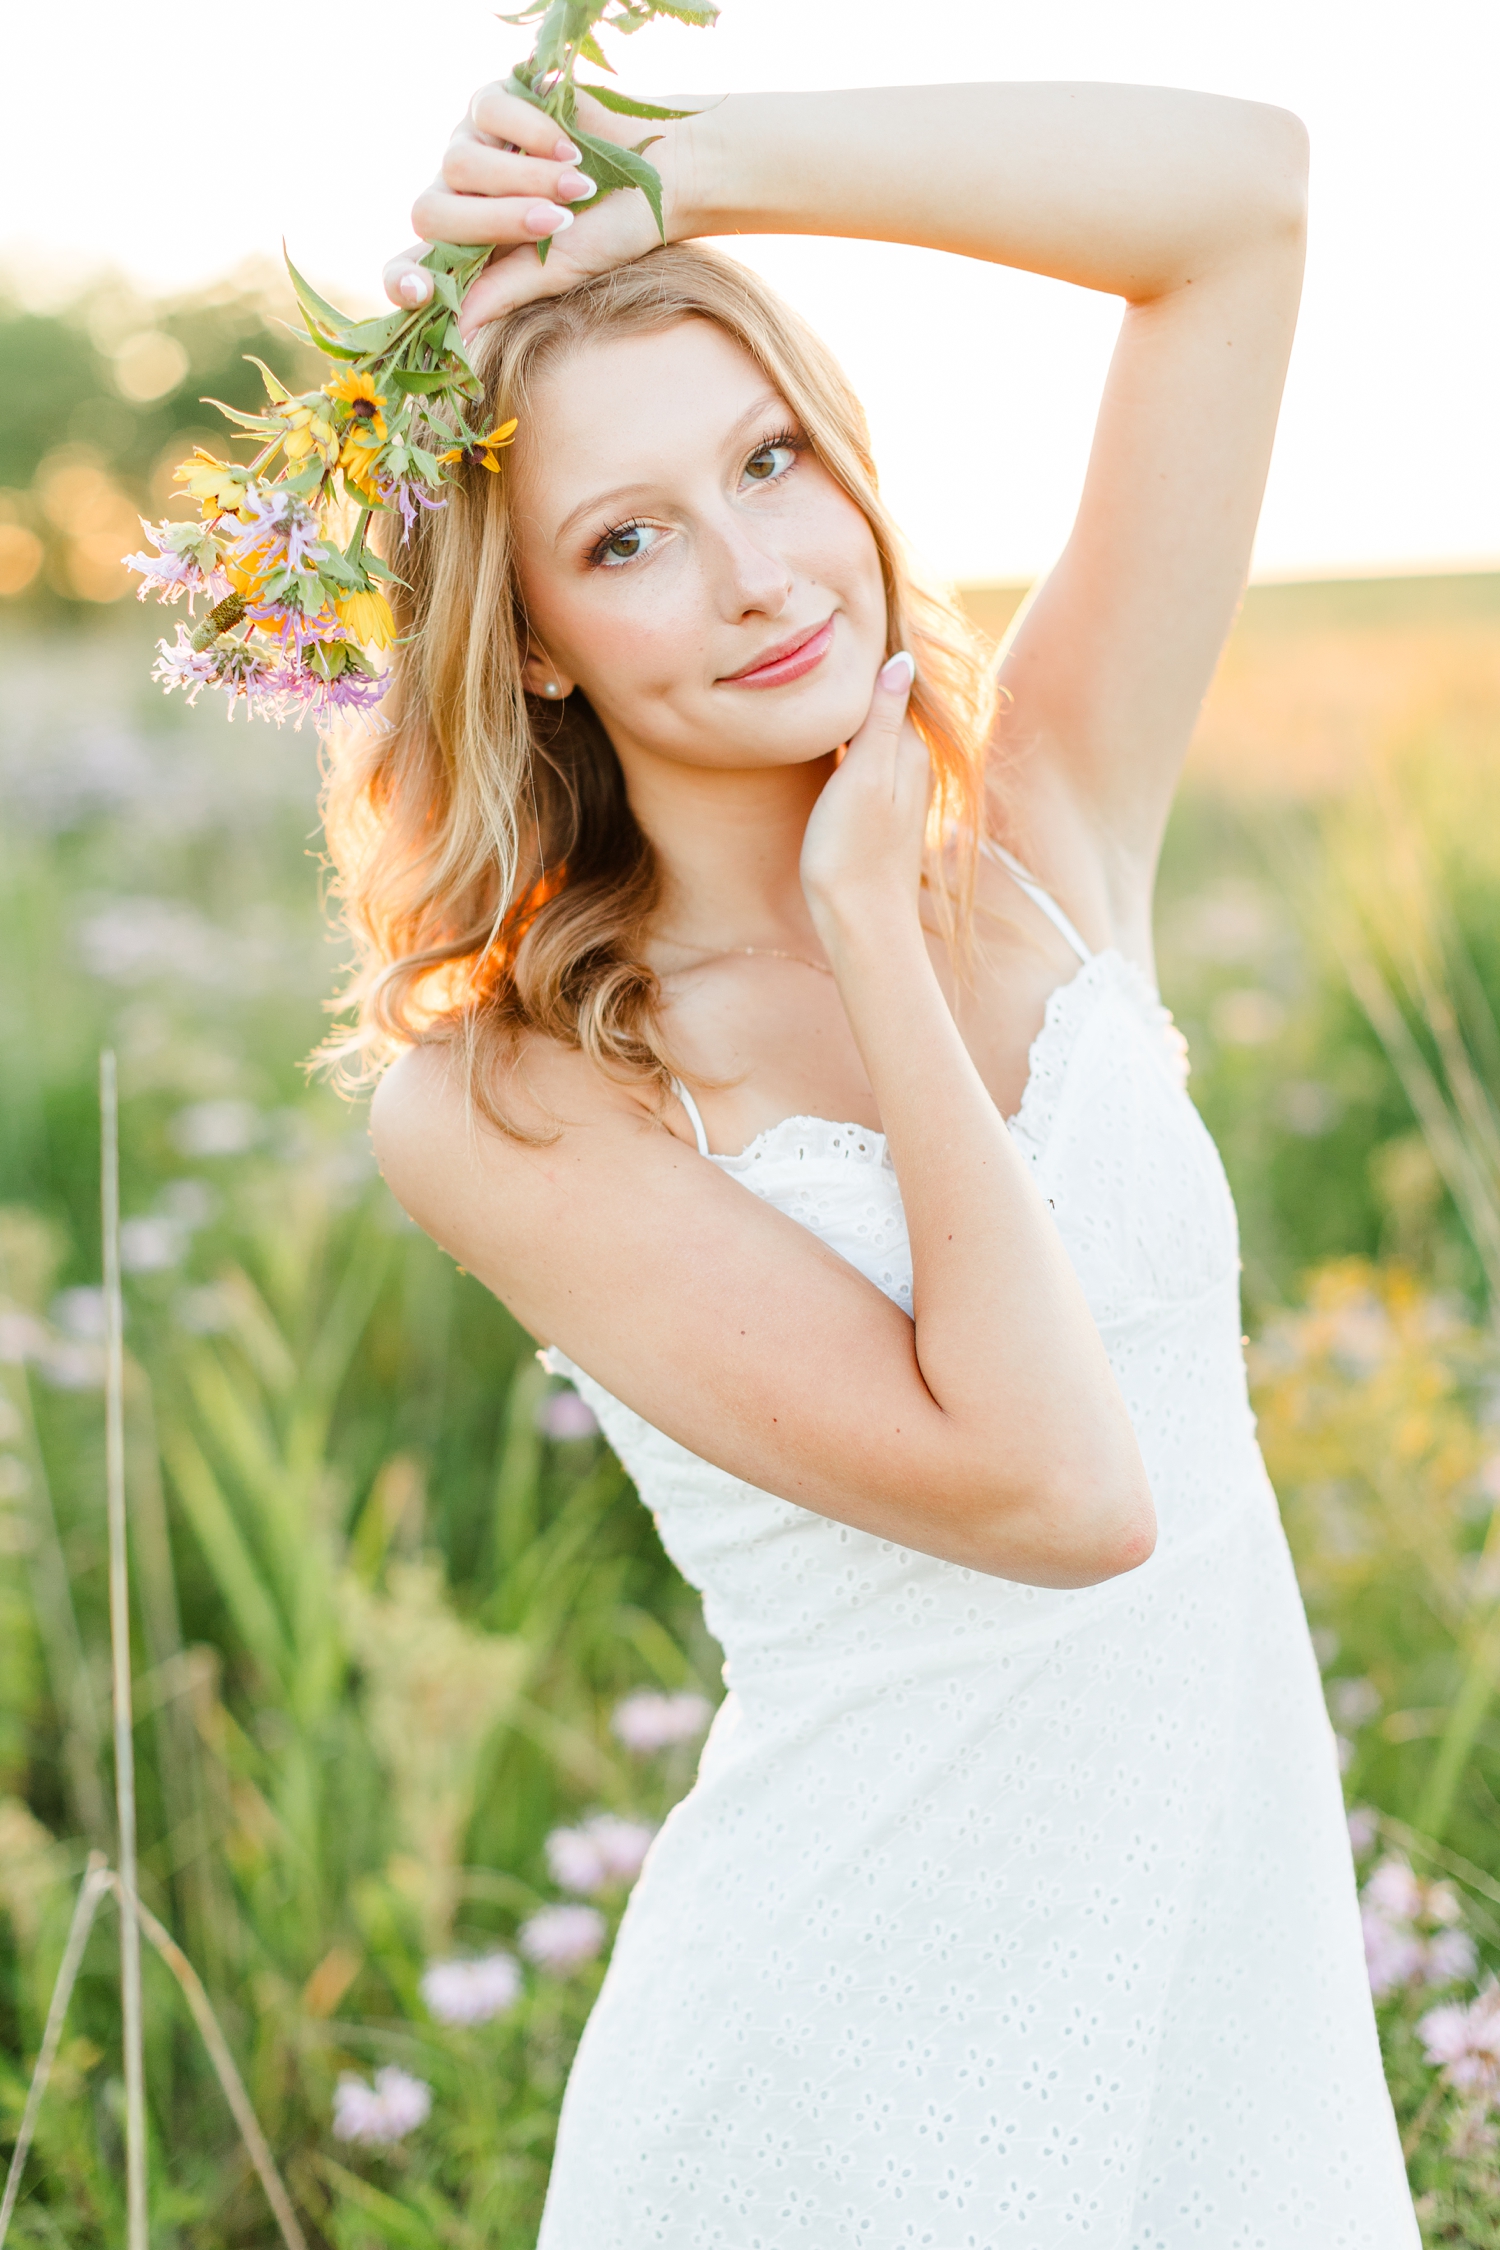 Ryley frames her face with flowers from a wildflower field at sunset | CB Studio